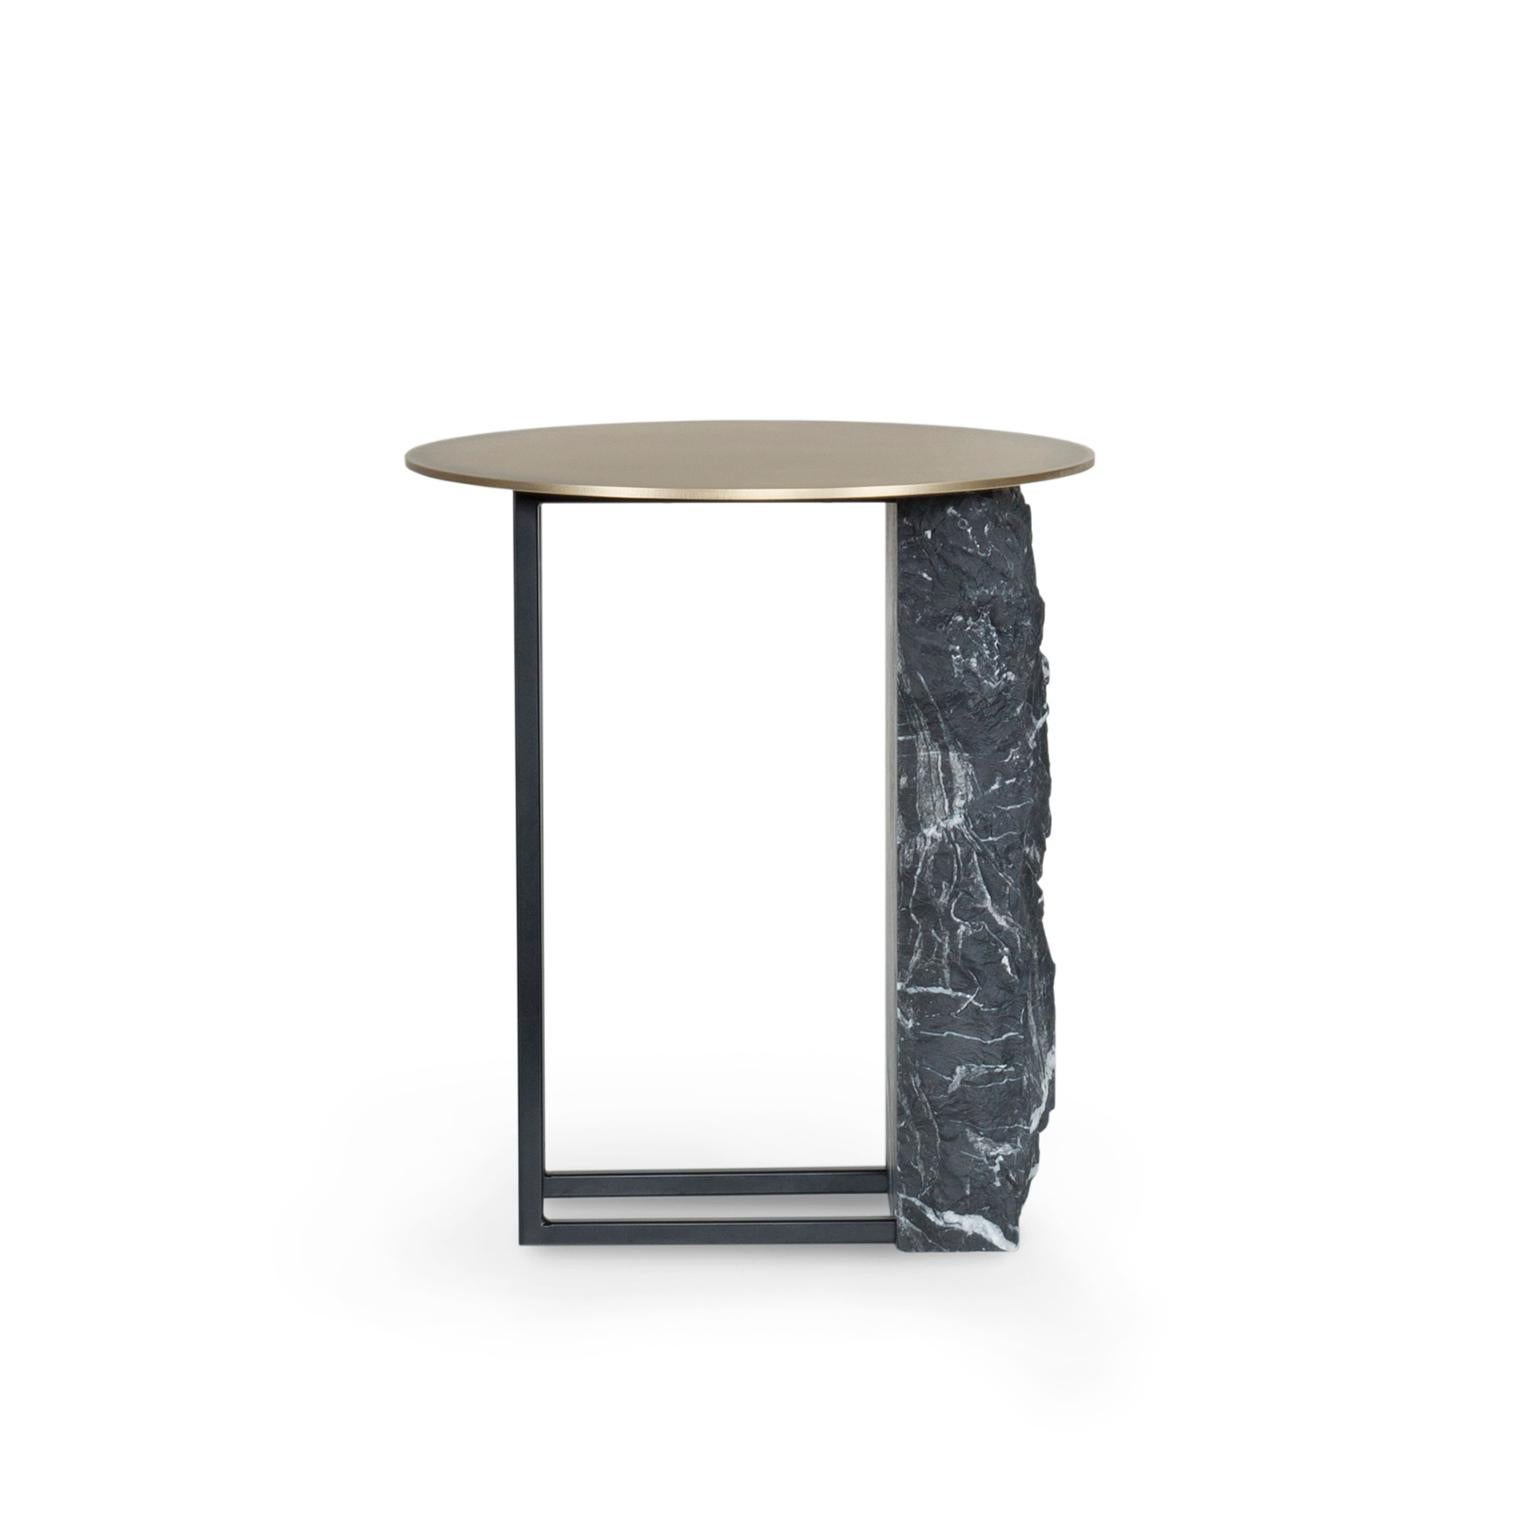 Aire Side Table, Contemporary Collection, Handcrafted in Portugal - Europe by Greenapple.

Aire's bold and irregular aesthetic lends itself perfectly to modern interior design. The inspiration of Grutas de Mira de Aire comes to life in a coffee